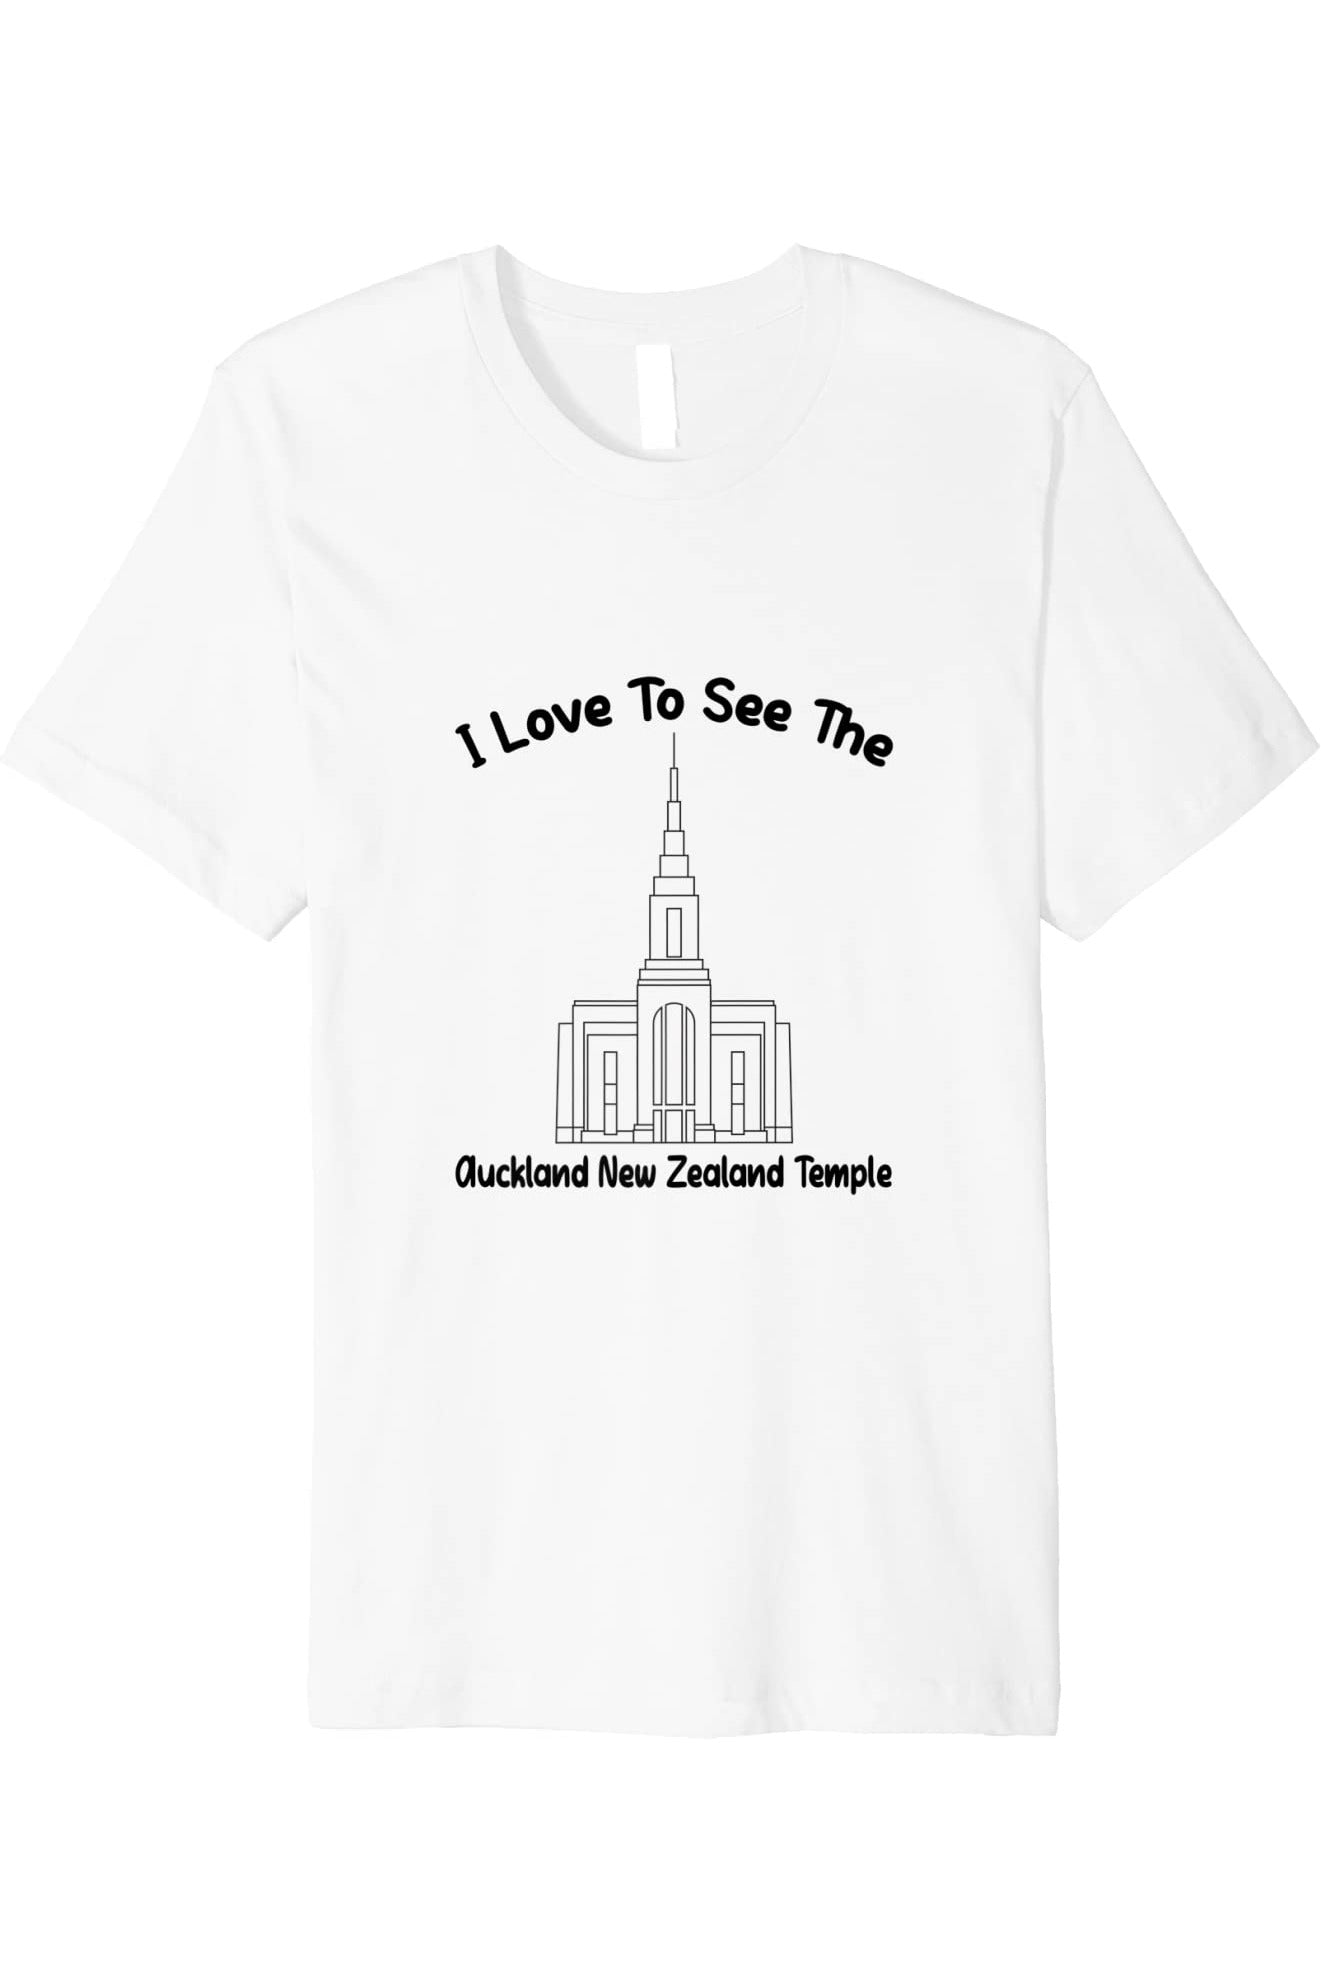 Auckland New Zealand Temple T-Shirt - Premium - Primary Style (English) US